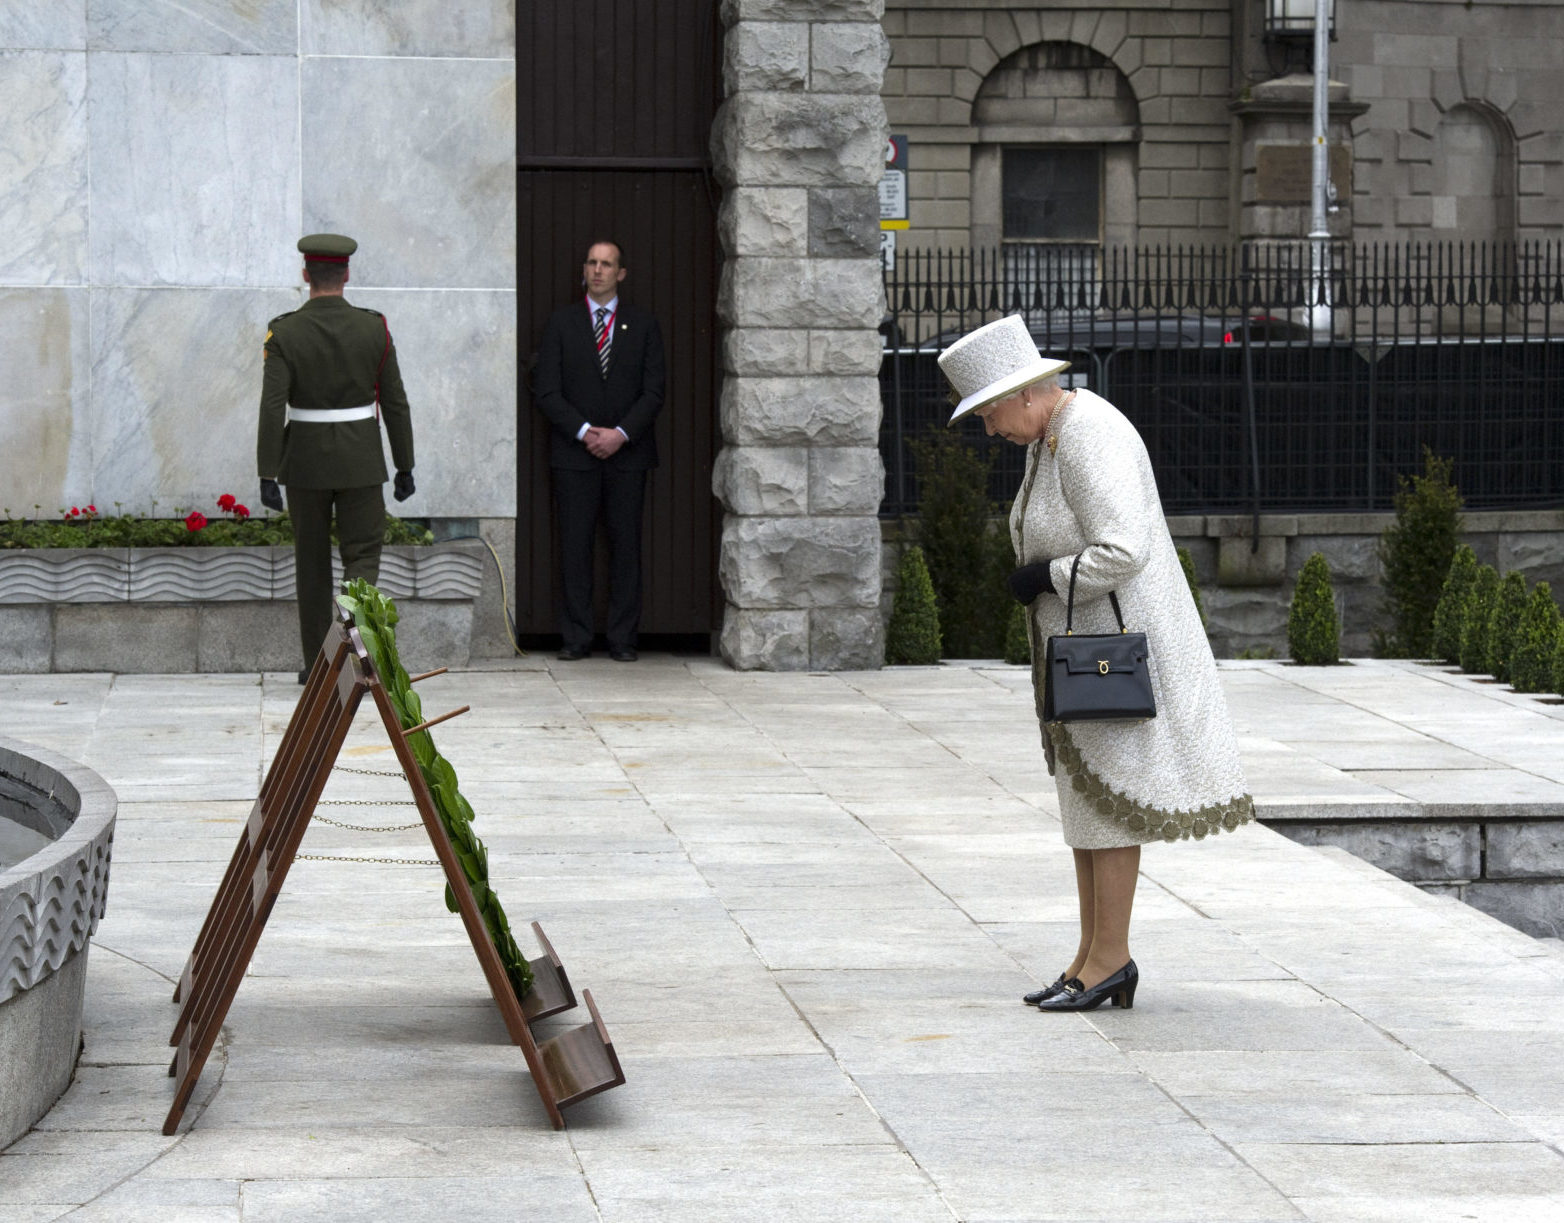 Britain's Queen Elizabeth II lays a wreath at the Garden of Remembrance in Dublin city in May 2011, which honours all those who fought for Irish freedom from British rule.